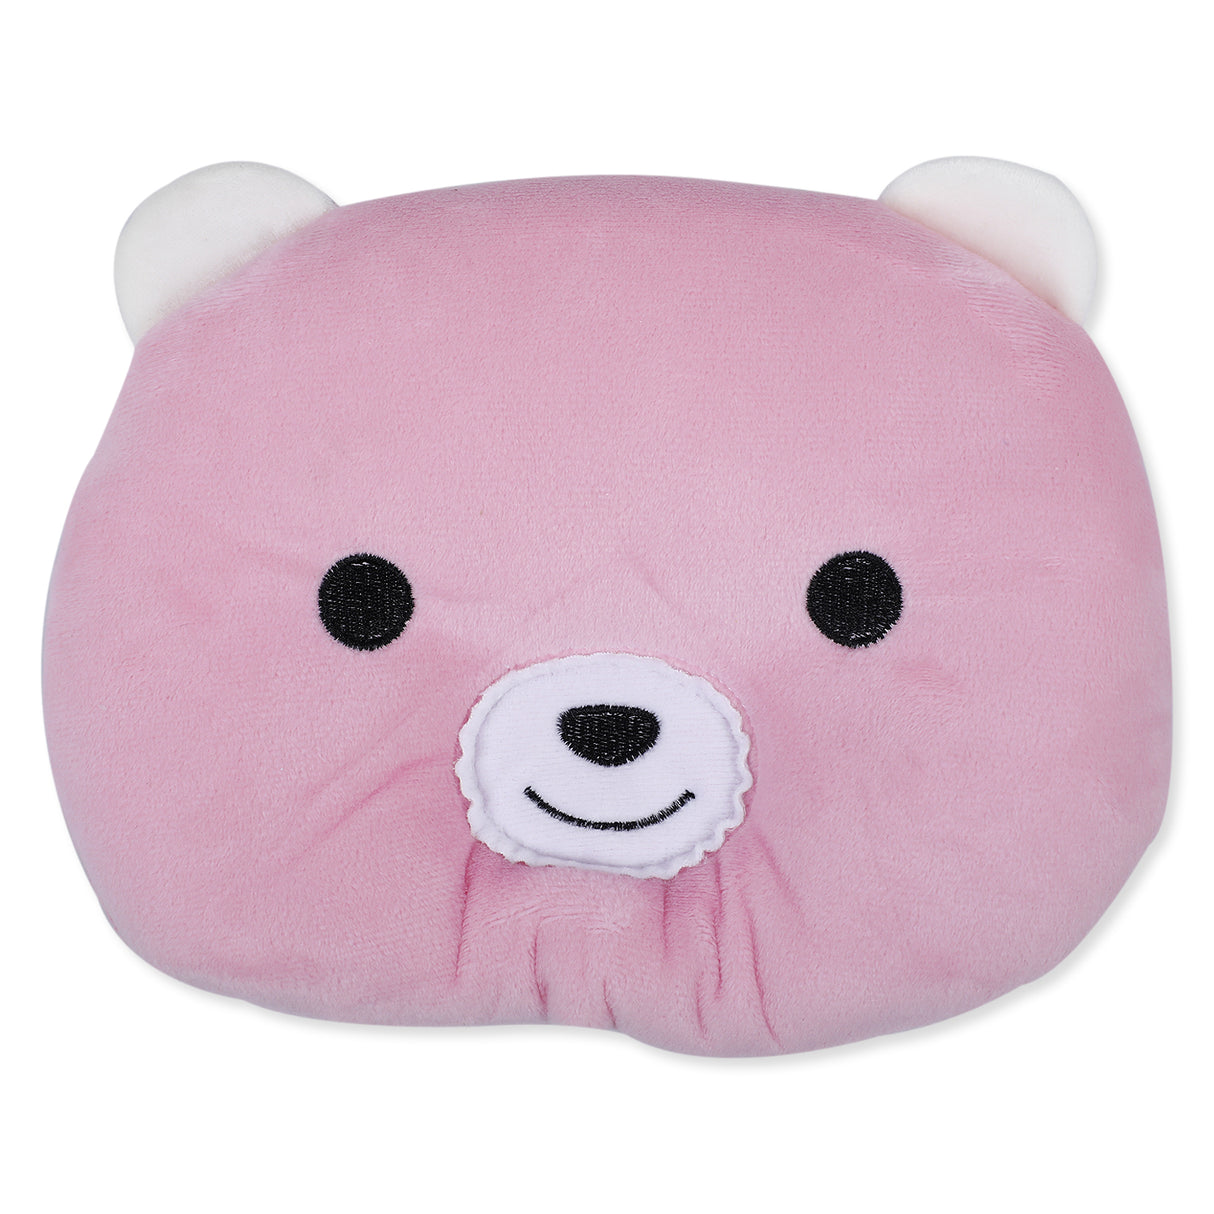 Bear Playful Soft And Cozy Pillow